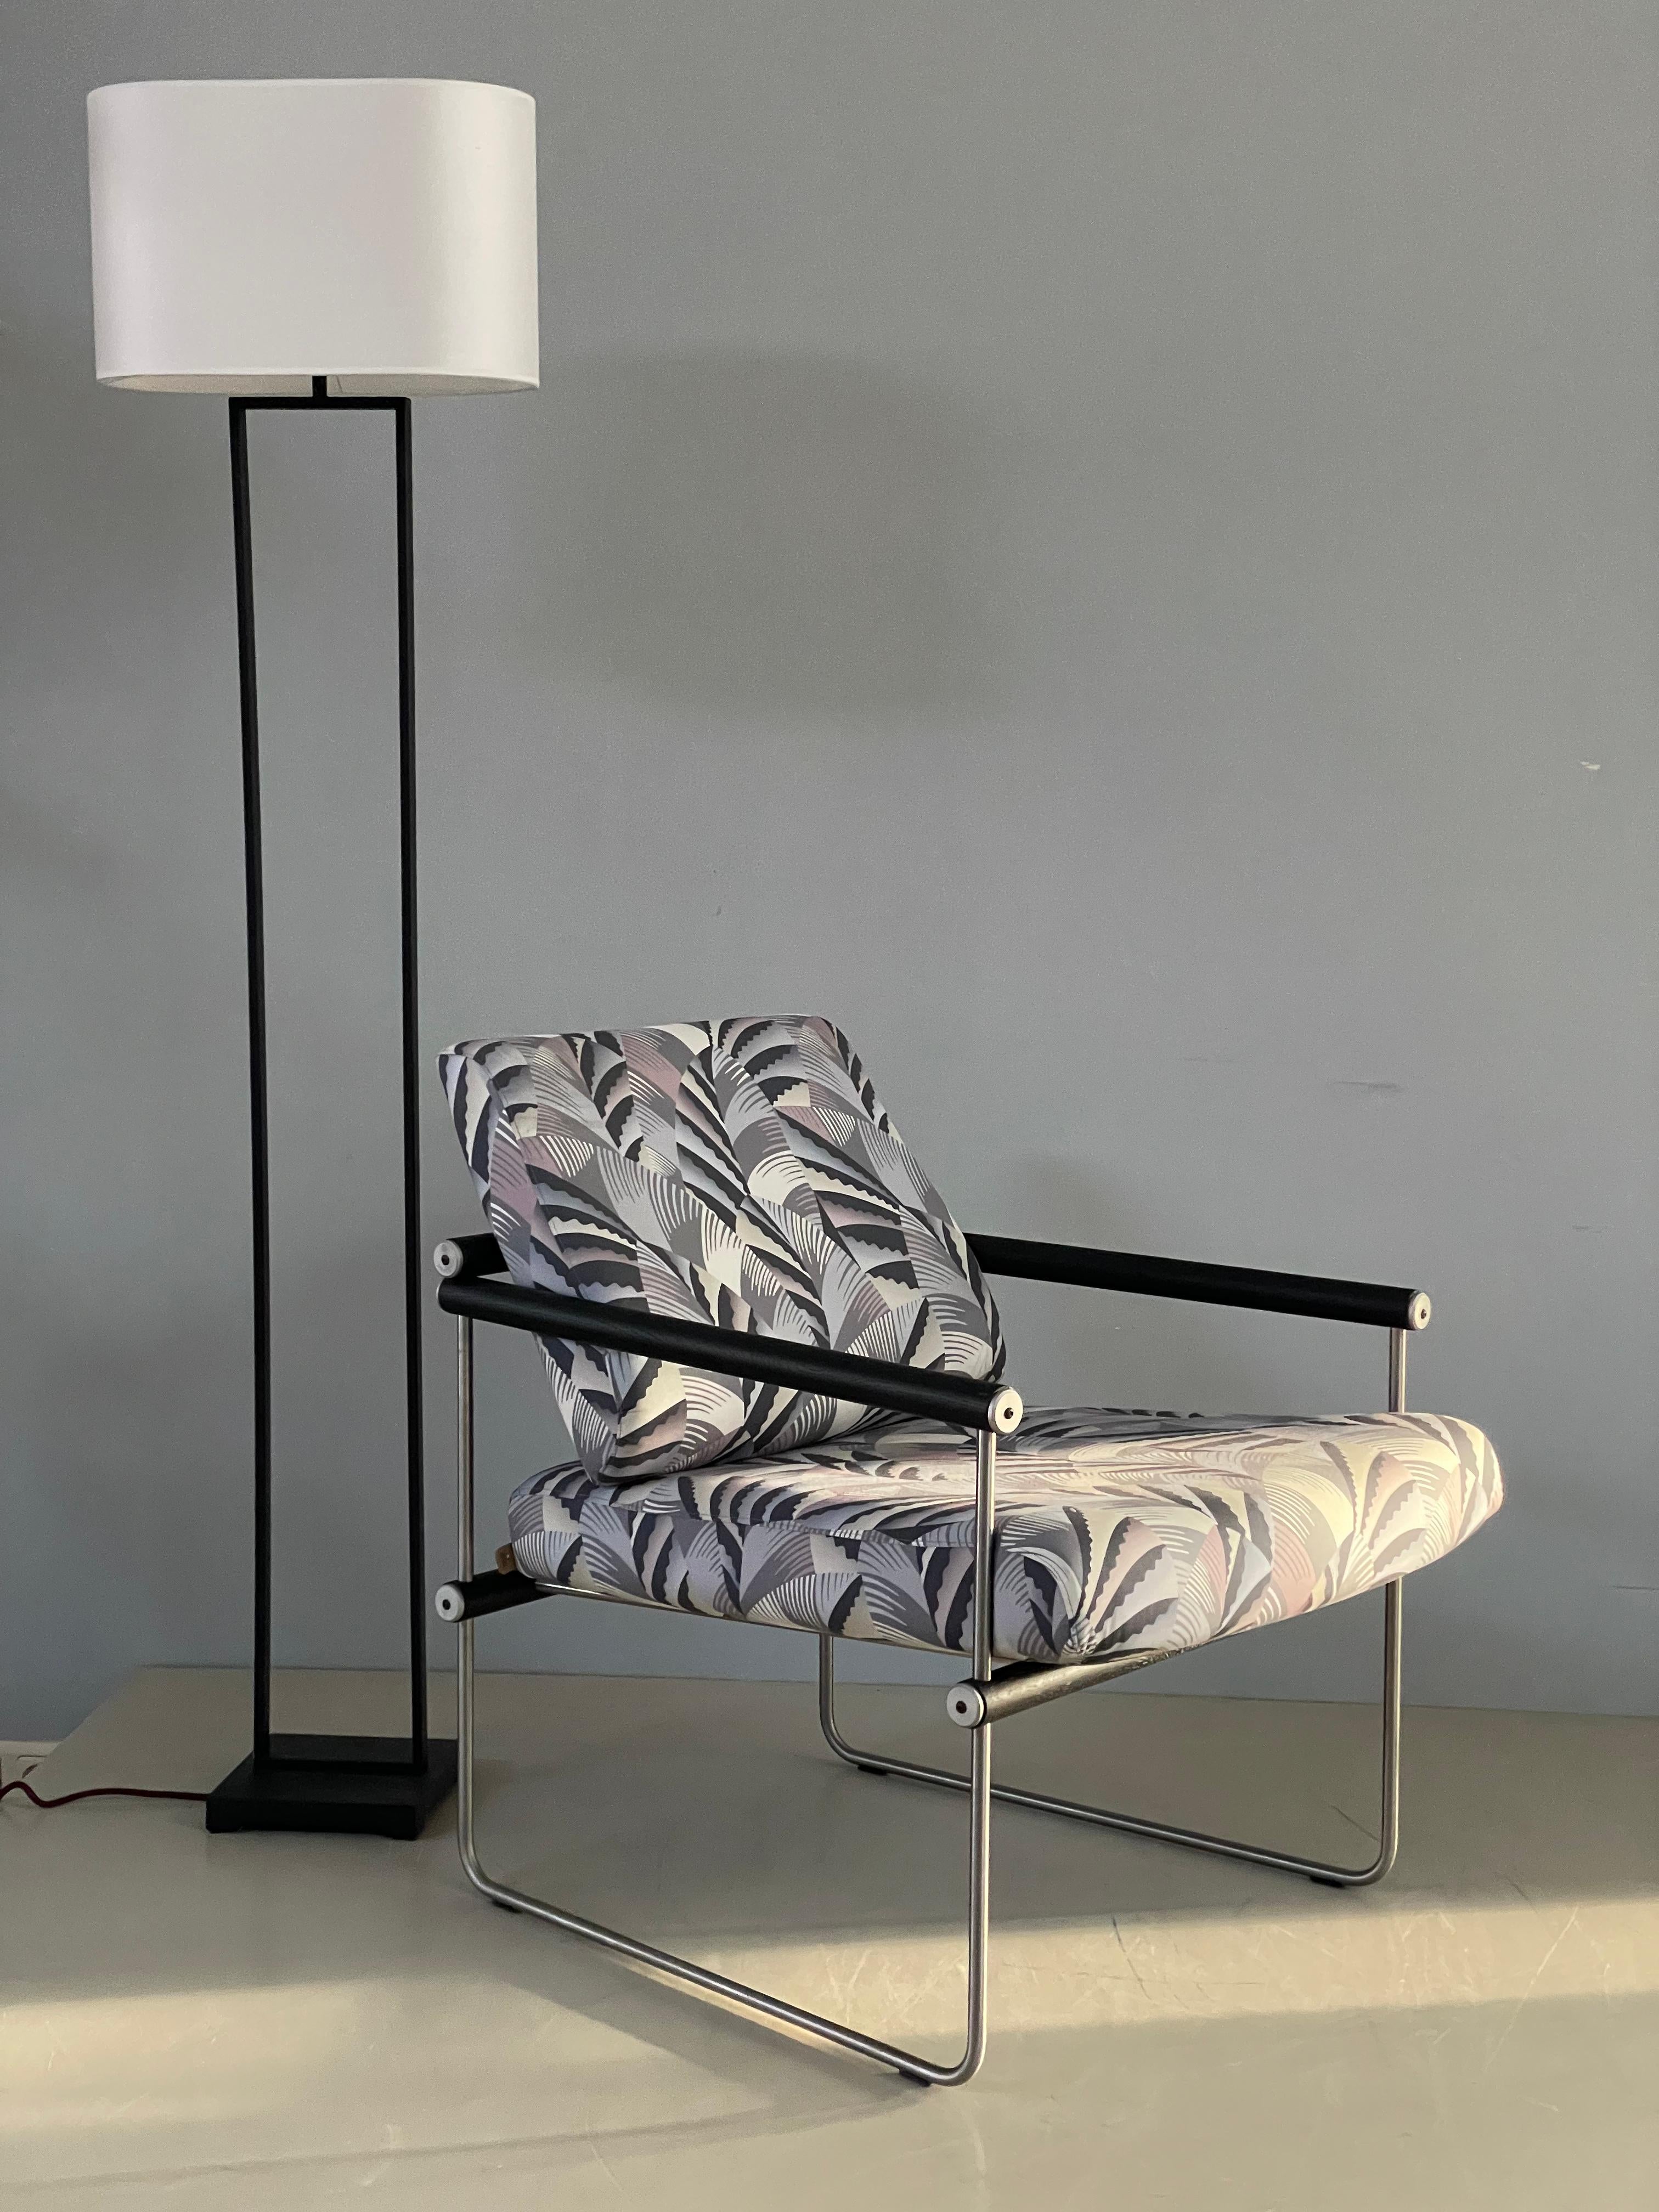 A Mid-Century Modern comfortable armchair - designed and locally produced by Ghyczy in the Netherlands. The armrests are made of solid black oak wood. The Frame of the armchair is made of stainless steel. The chair looks airy and and elegant and is